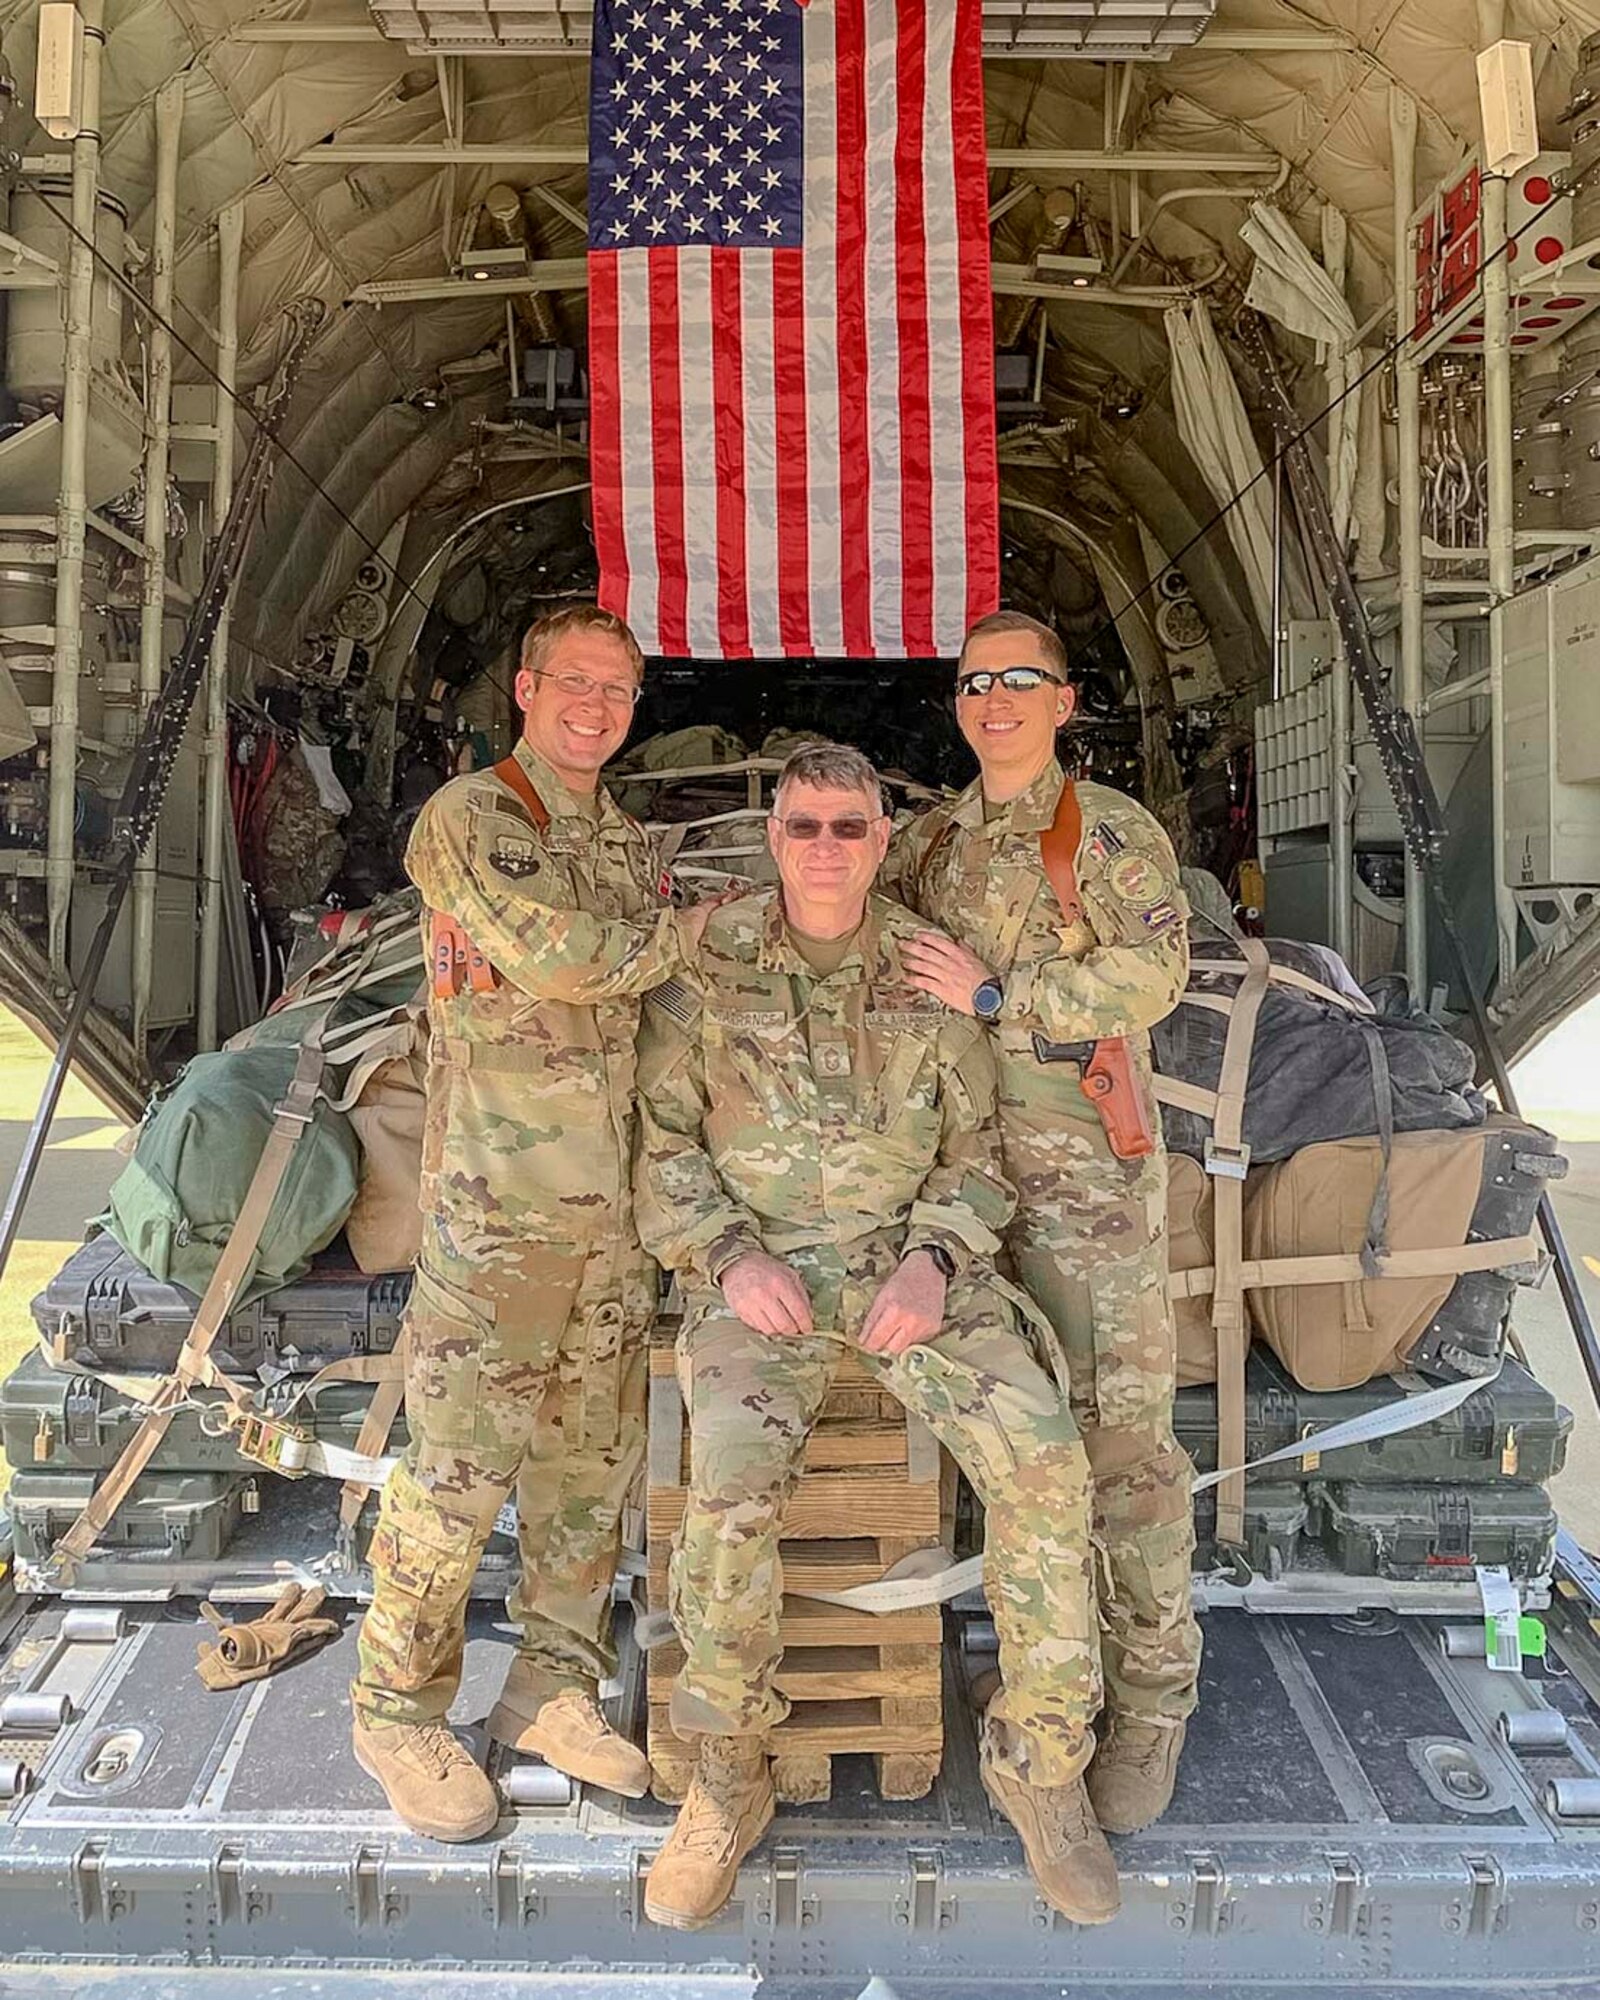 Air Force Reserve Master Sgt. Scott Klobucher (left) and Staff Sgt. Christopher James (right) poses with Chief Master Sgt. Donald Tarrance on the back of a C-130J Hercules loaded with cargo while deployed to Syria in 2019. Tarrance has served for over 40 years in a variety of positions and statuses. (Courtesy photo)